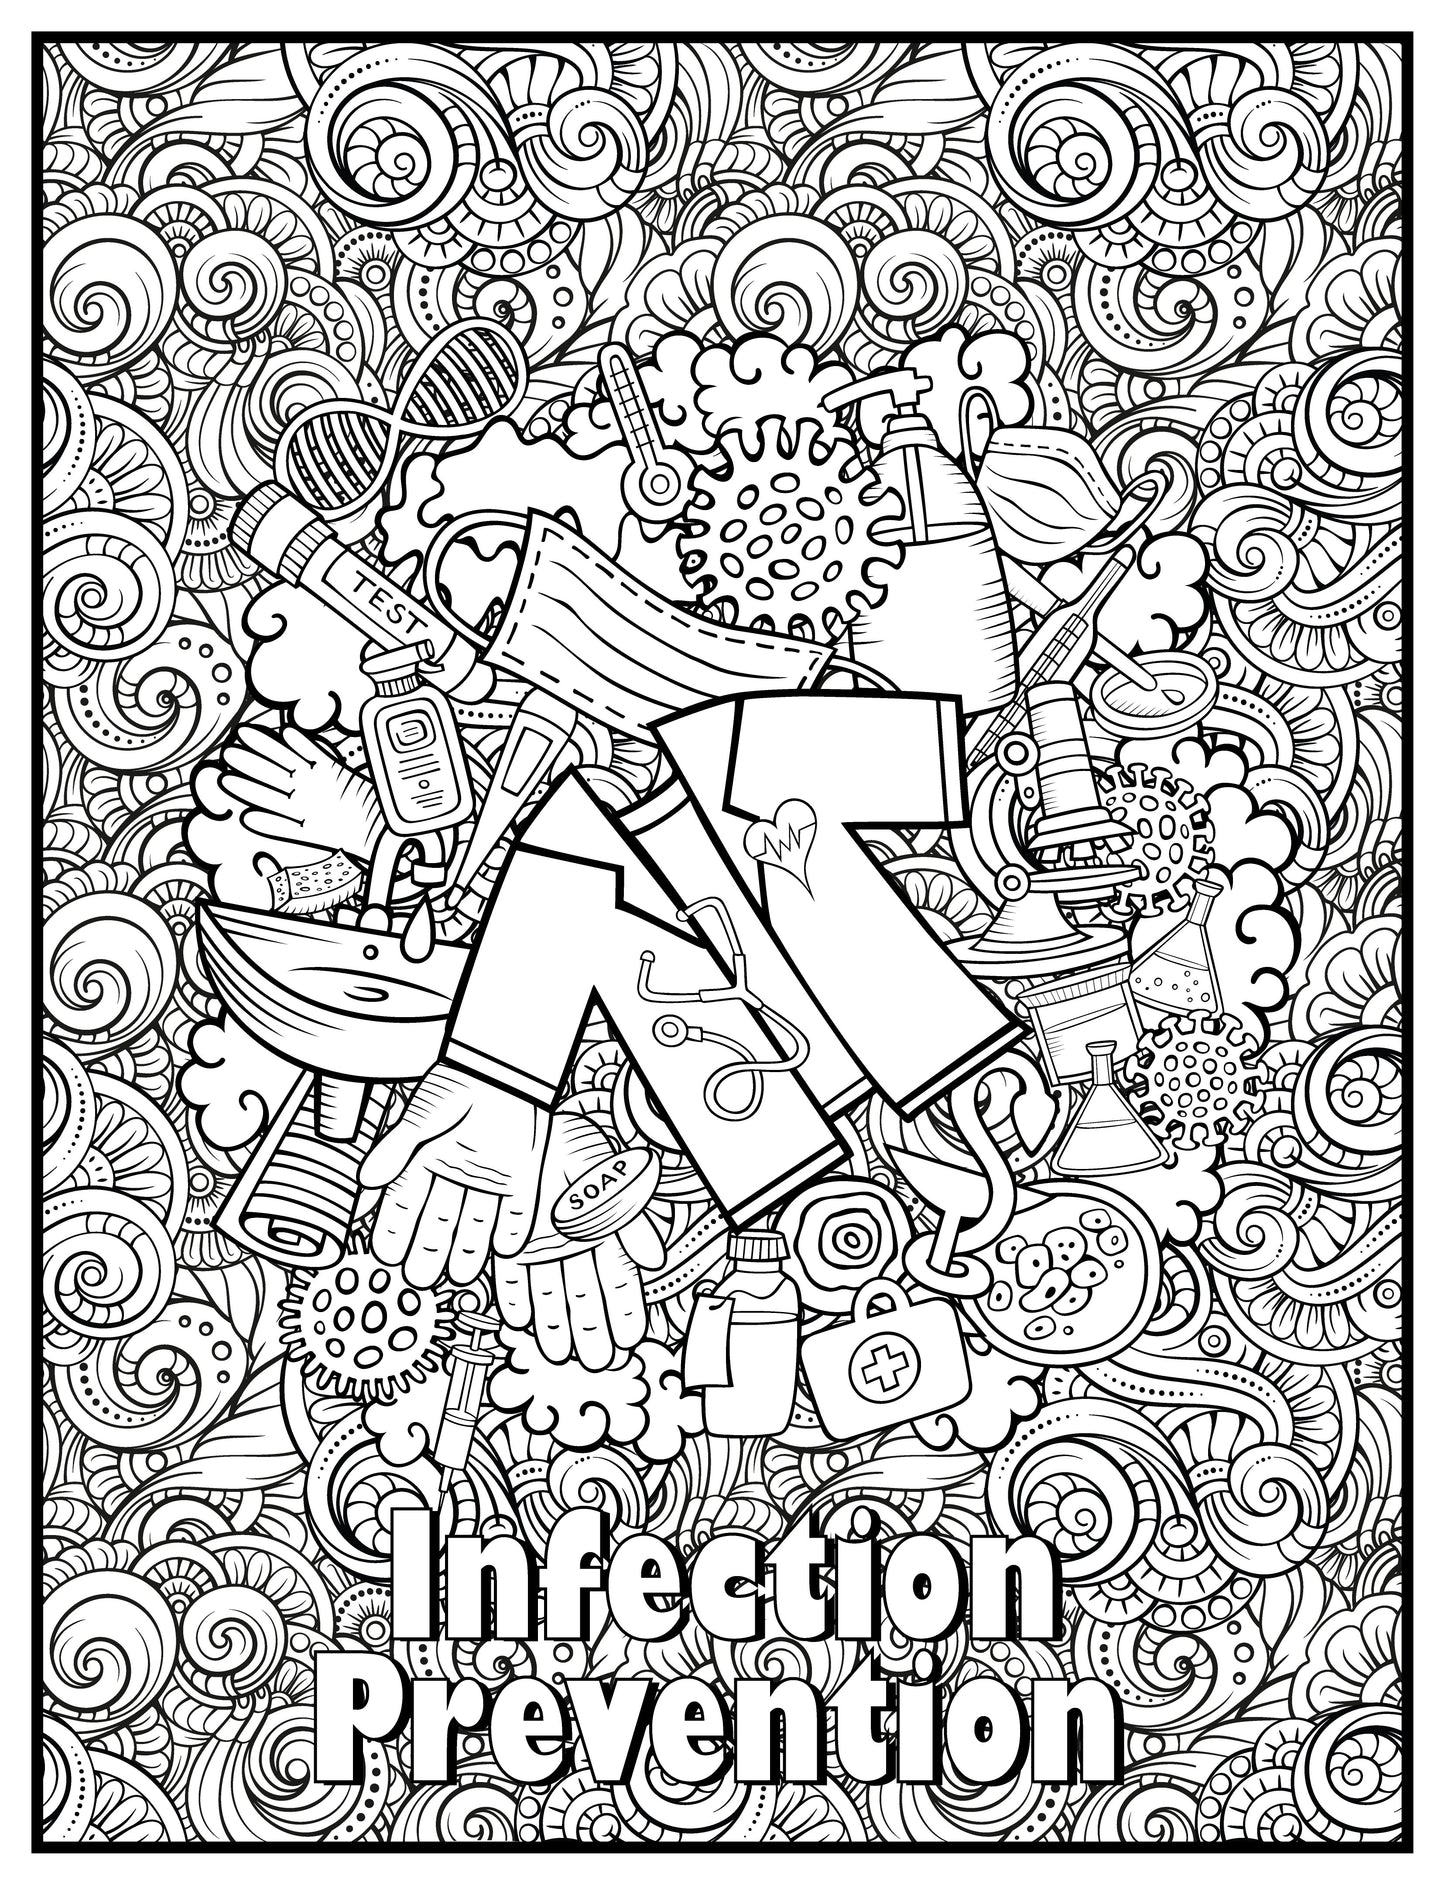 Infection Prevention Personalized Giant Coloring Poster 46"x60"